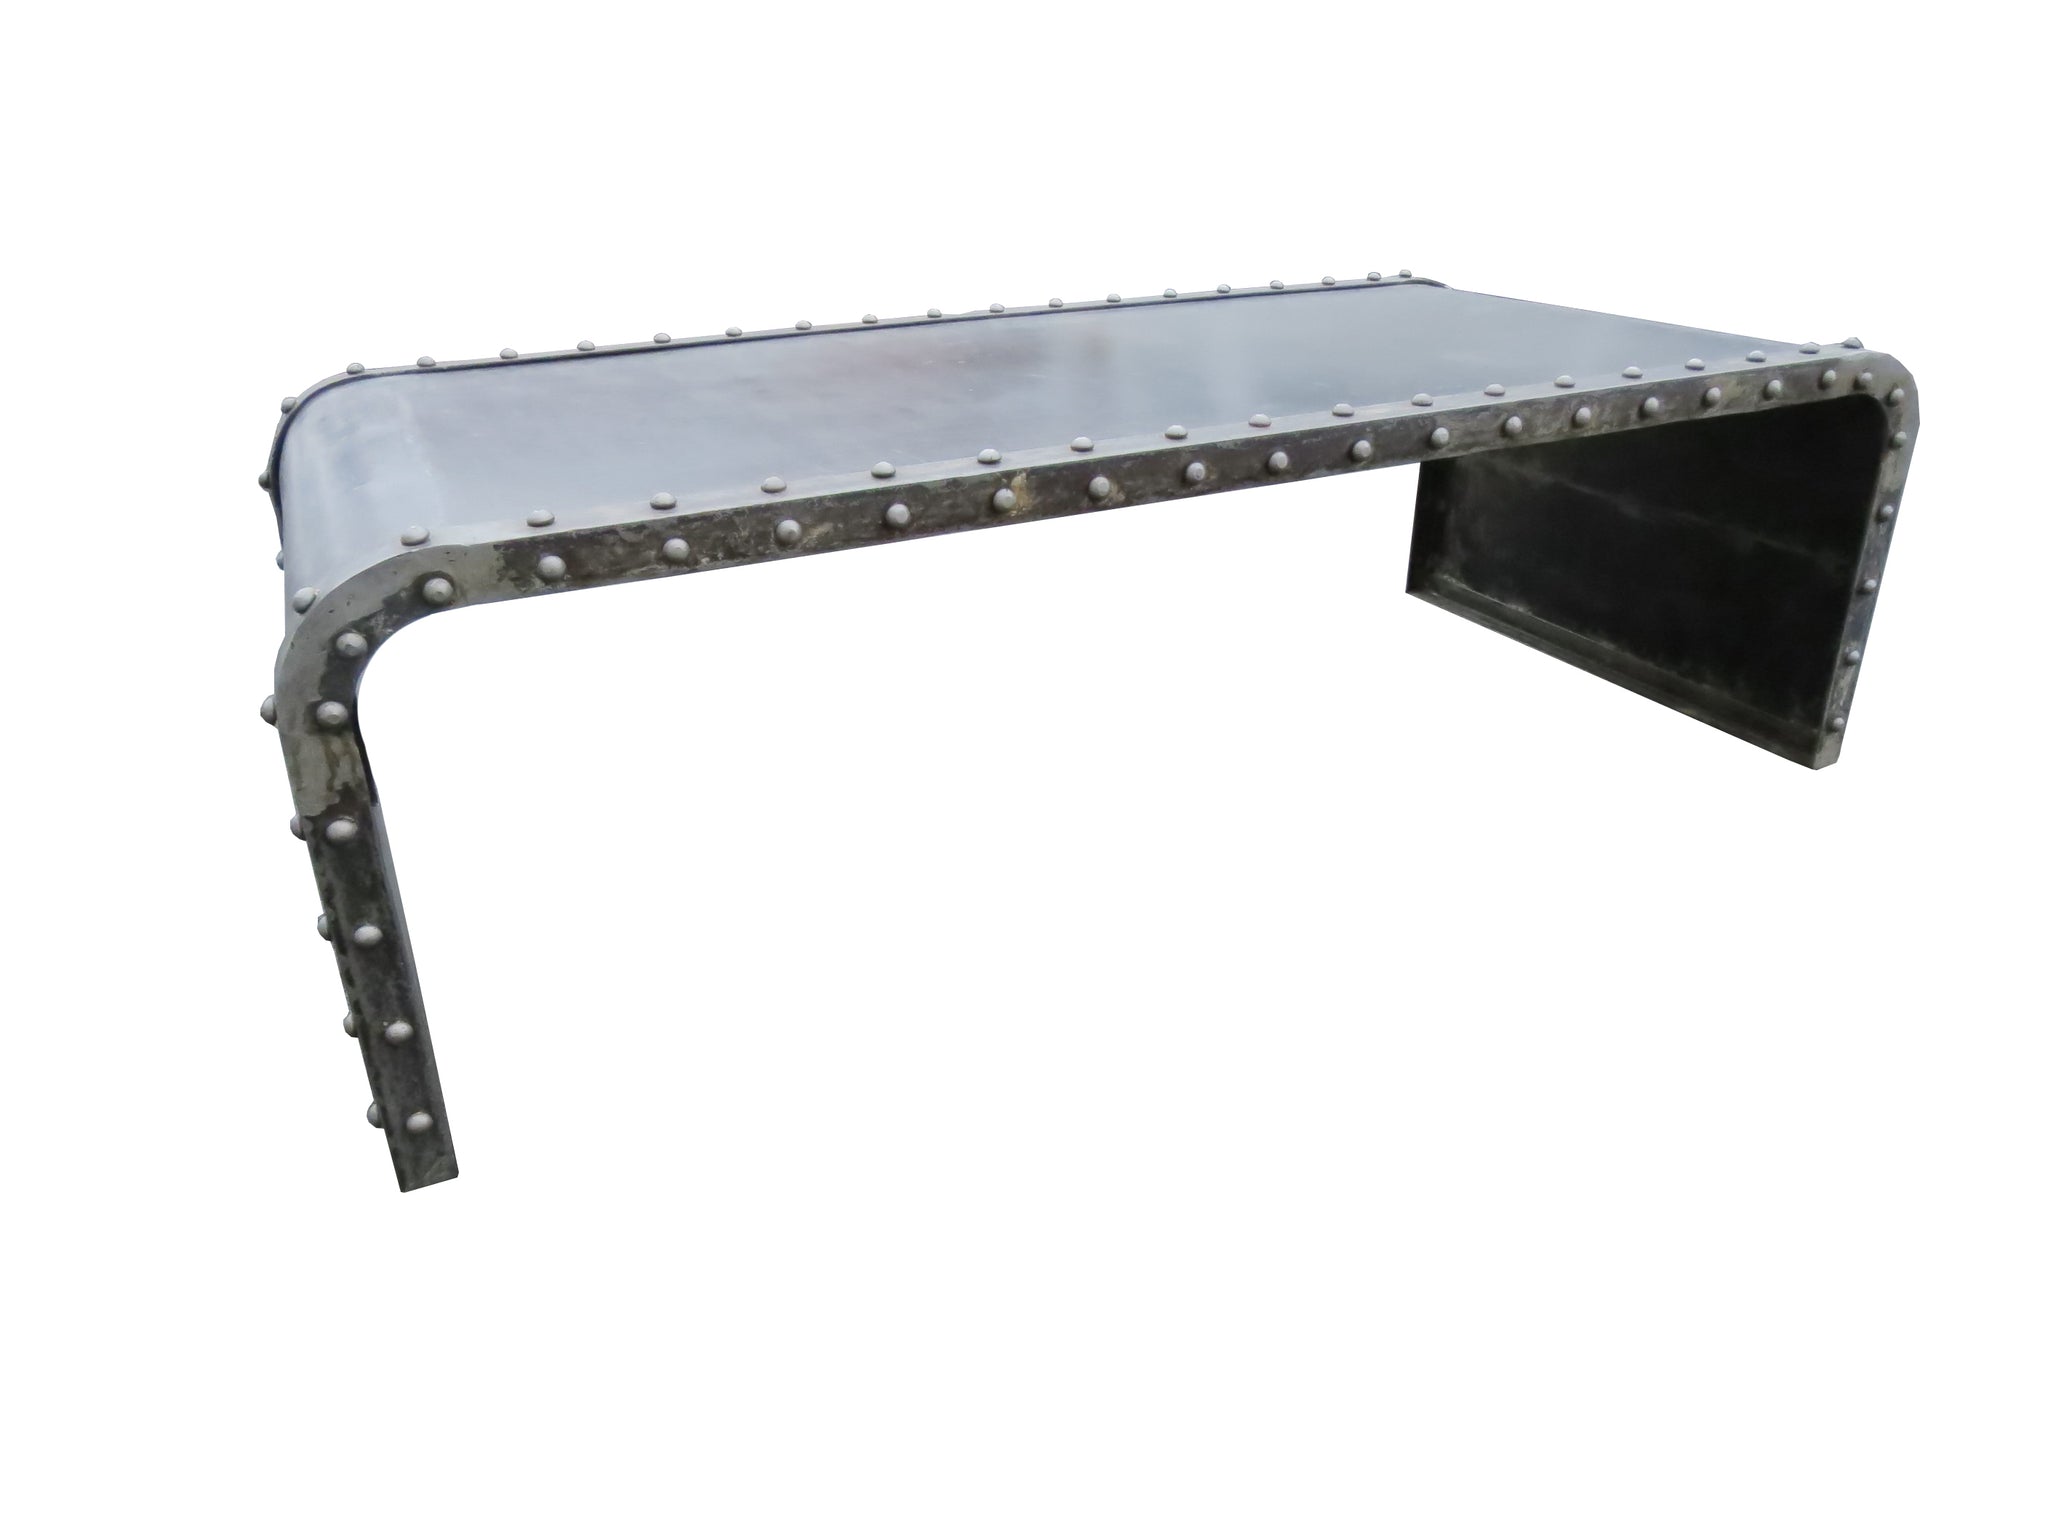 edgebrookhouse - Brutalist Solid Steel and Studded Waterfall Coffee / Console Table